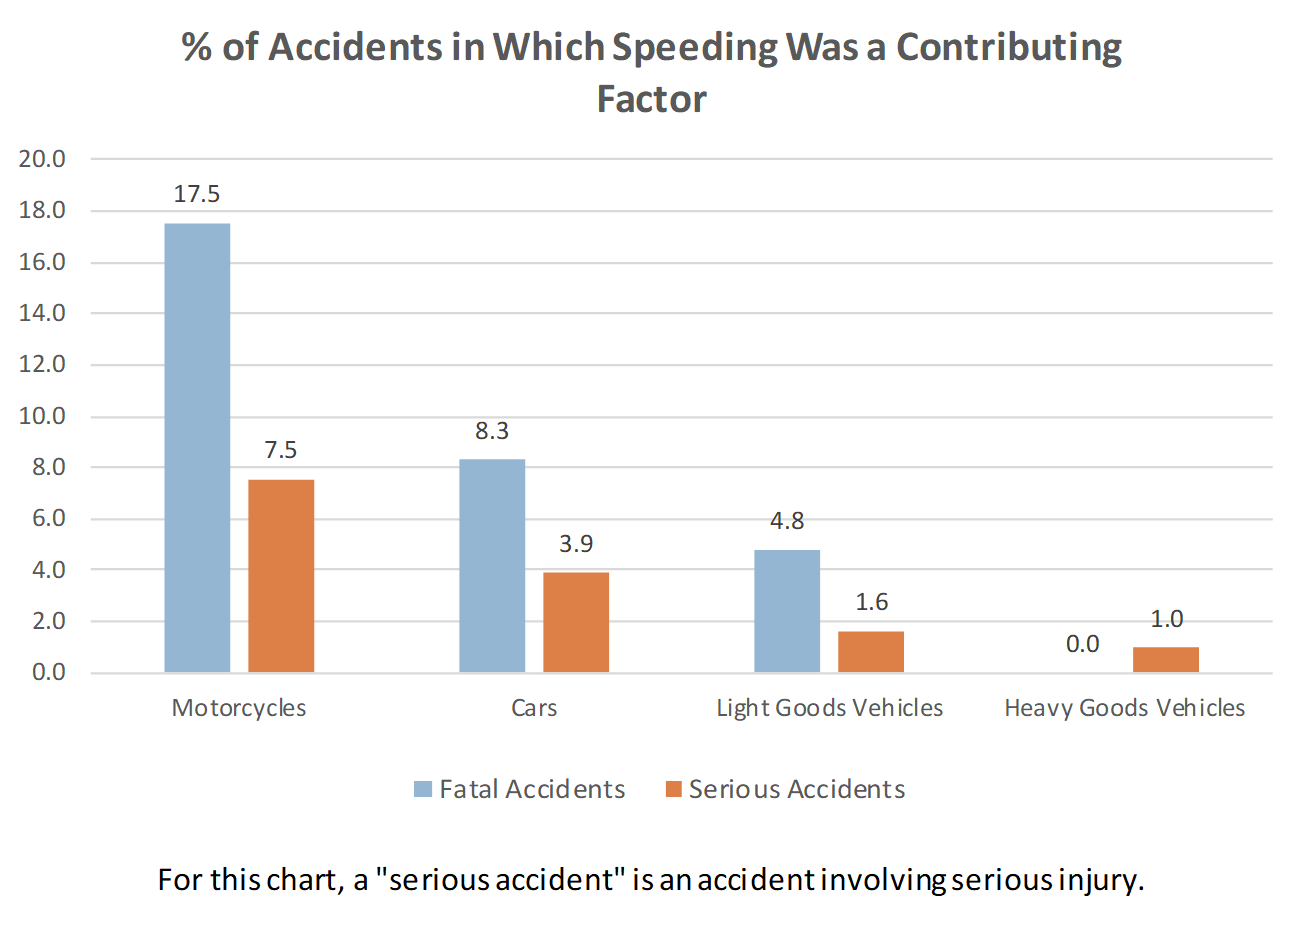 % of Accidents in which speeding was a contributing factor